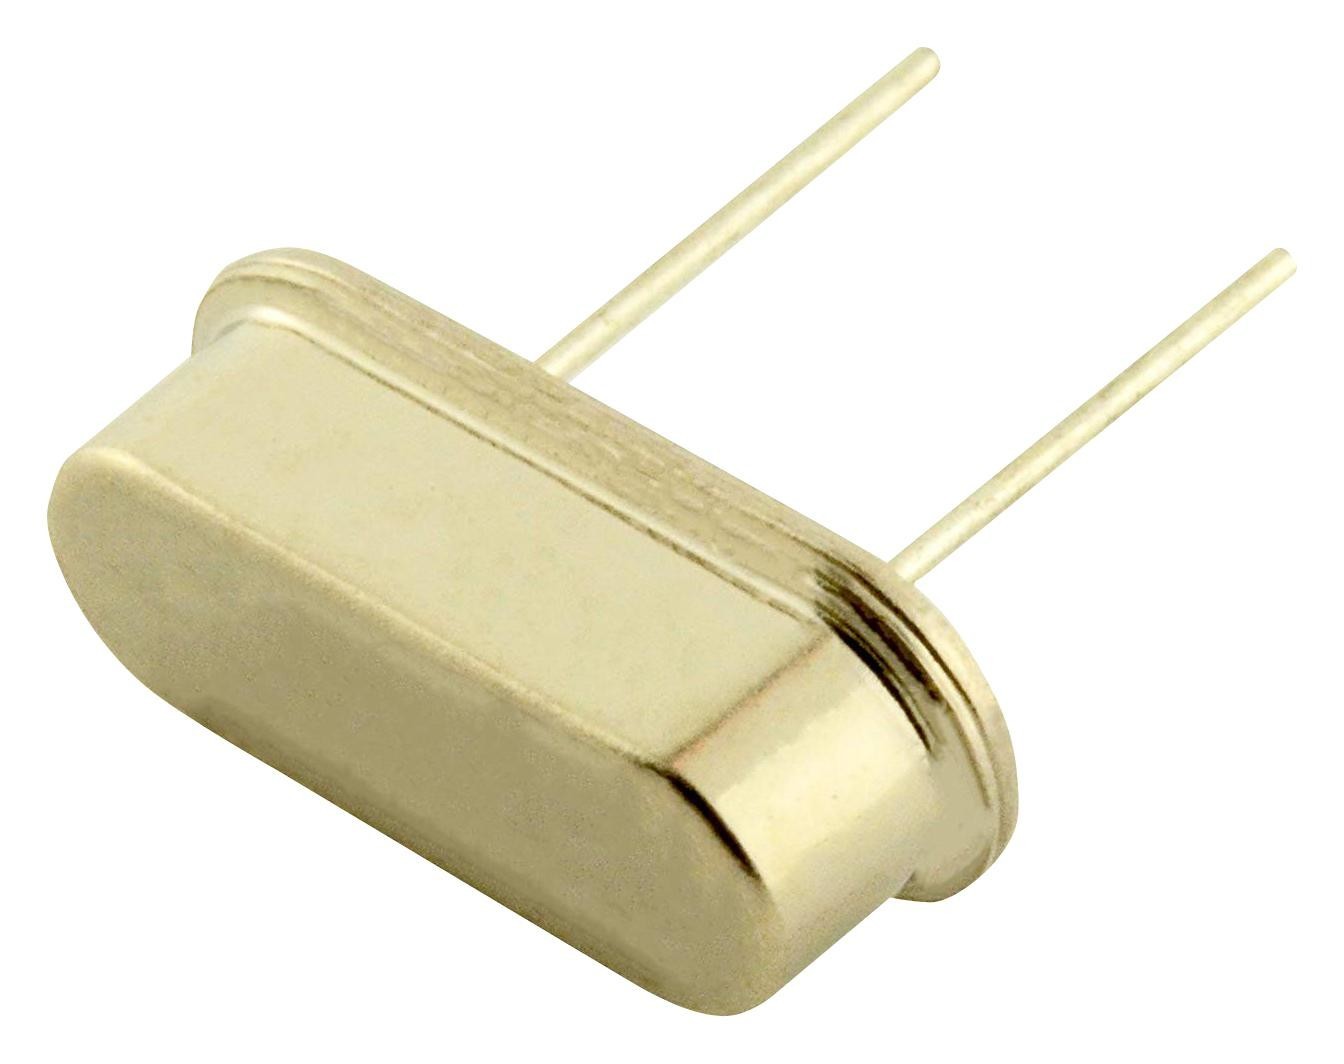 Raltron As-20.000-20 Crystal, 20Mhz, 20Pf, 11.35mm X 5mm